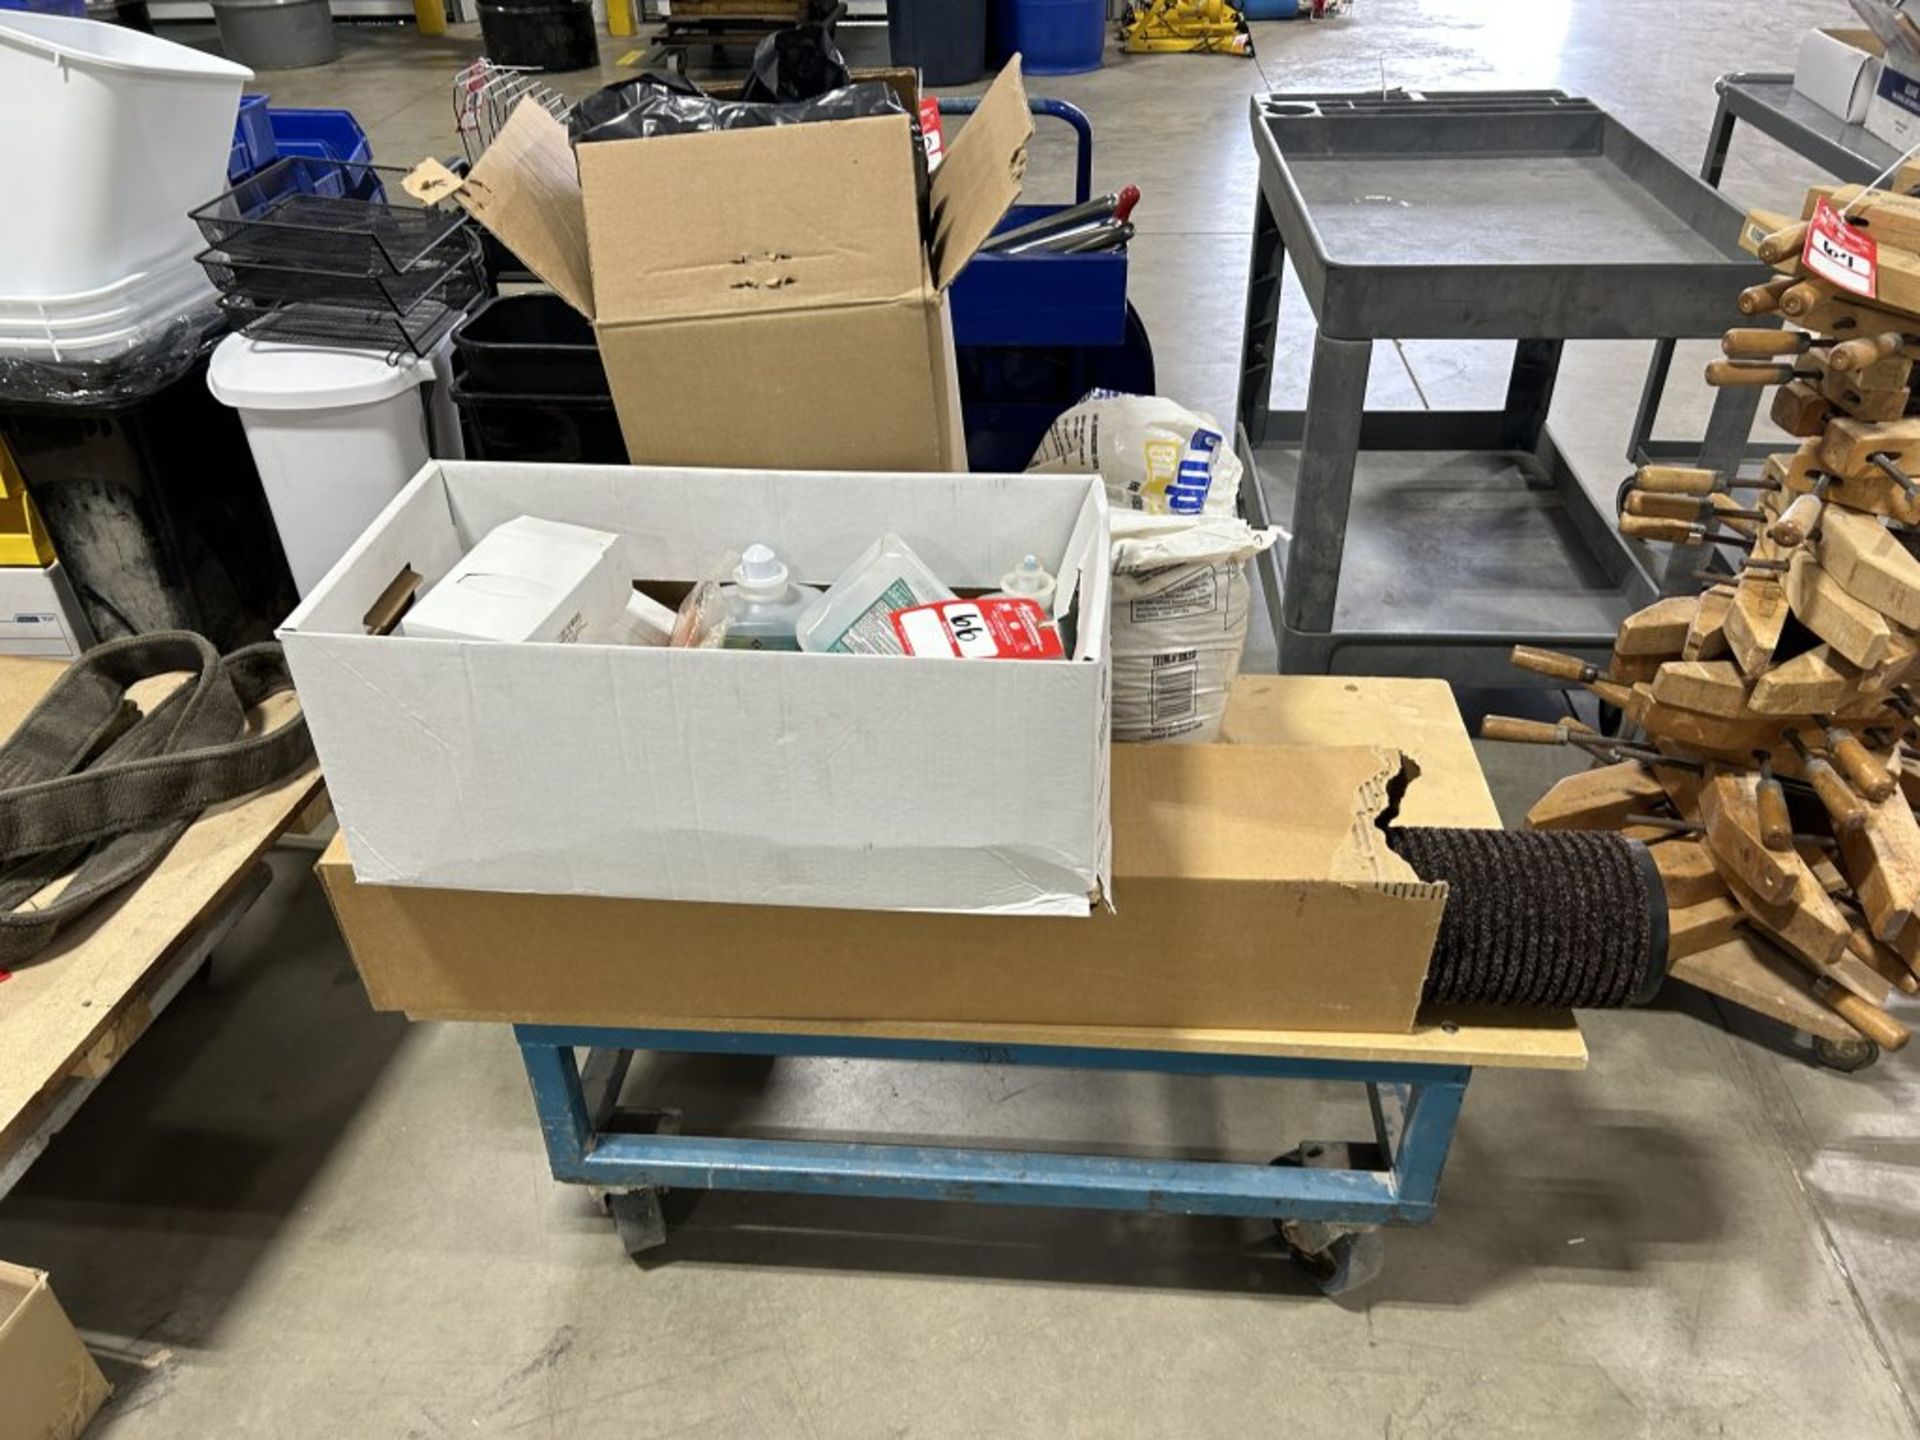 METAL FRAME ROLL-AROUND CART 44" X 25", BOX WITH BOTTLES OF ANTIBIOTIC FOAM, TOWELS, BAG OF